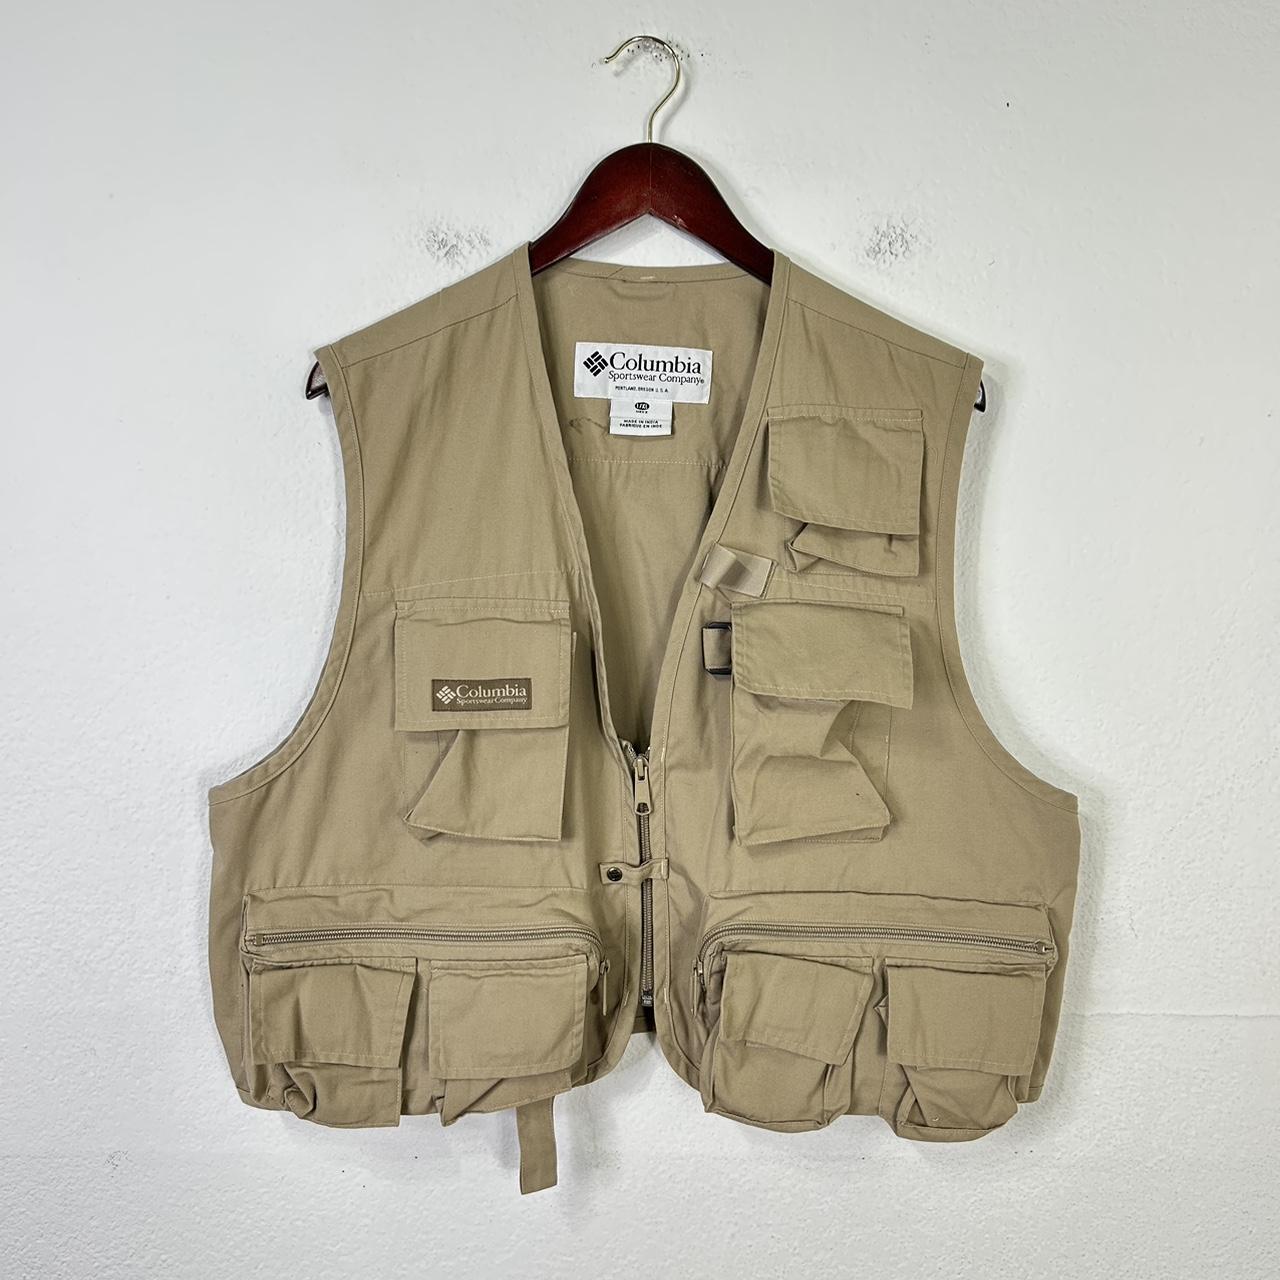 Columbia fishing vest., MEASUREMENTS, chest(pit to